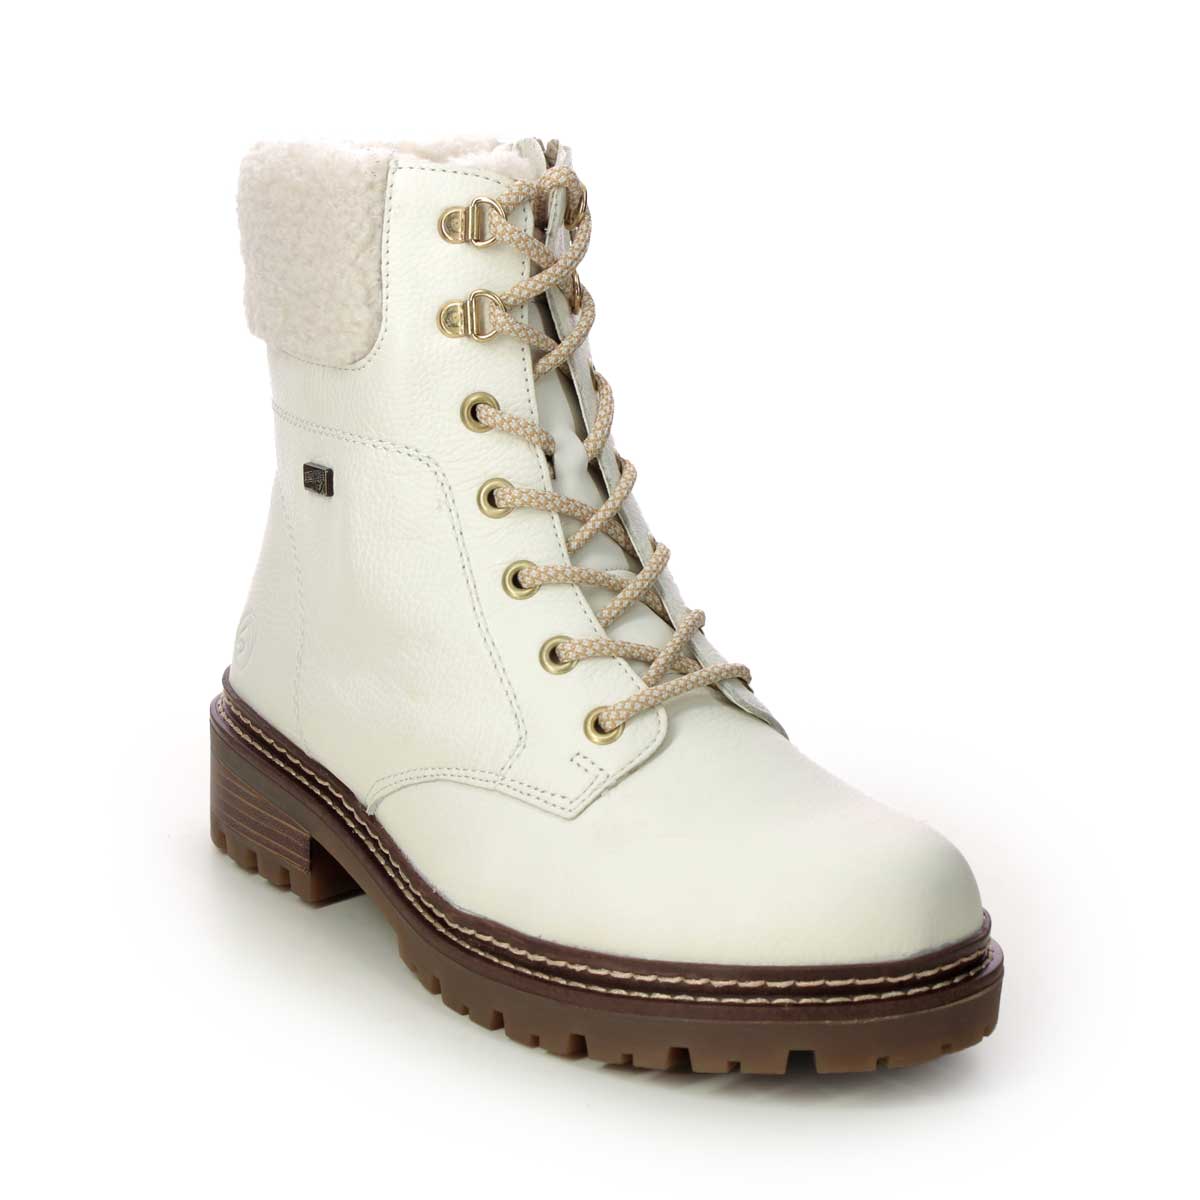 Remonte Astra Teddy Tex White Leather Womens Winter Boots D0B74-81 In Size 39 In Plain White Leather